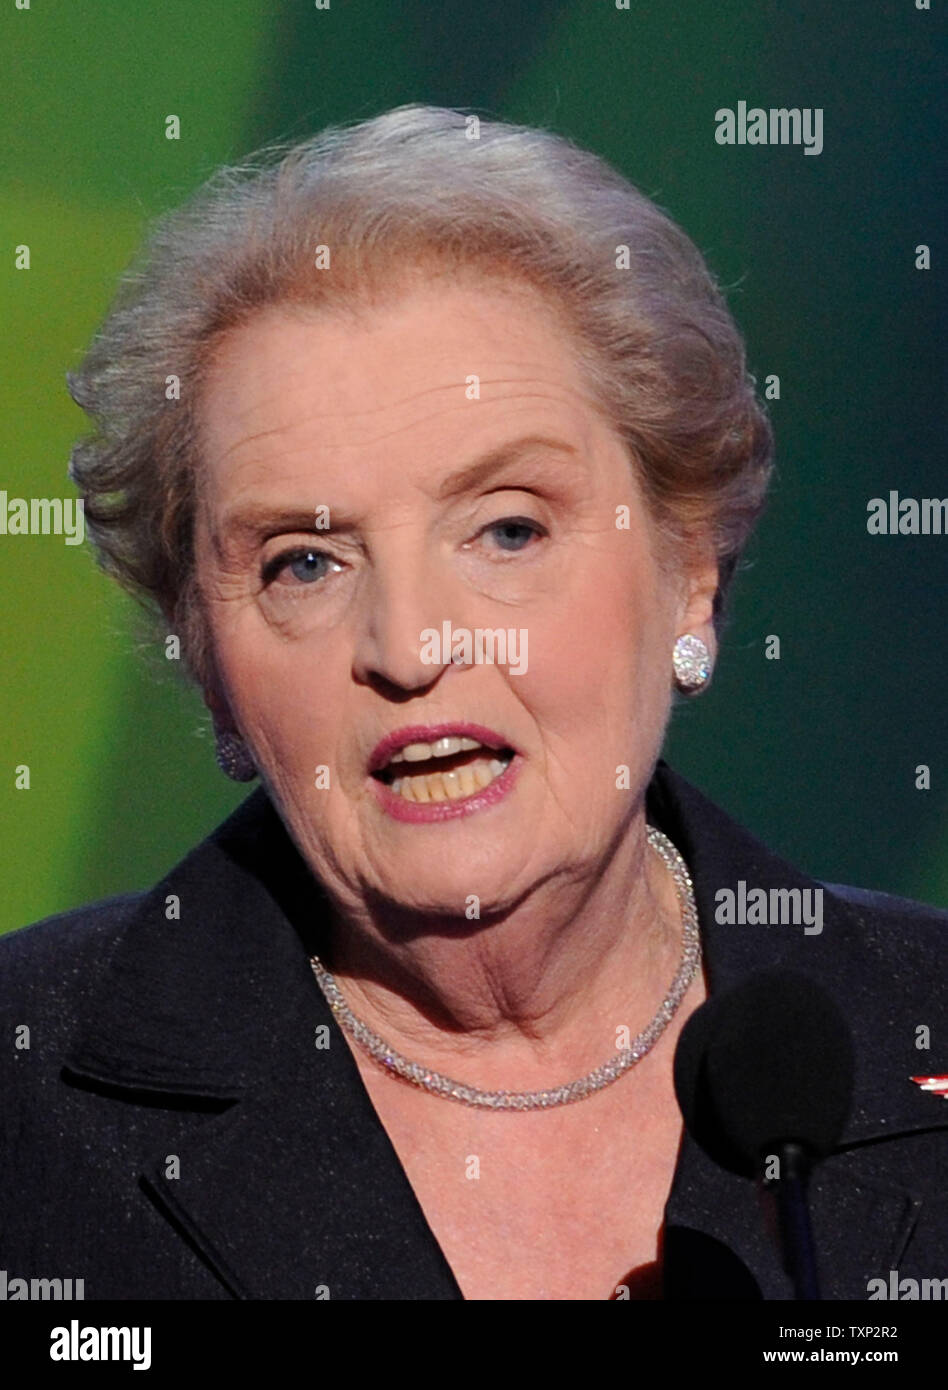 Former Secretary of State Madeline Albright delivers remarks during the third day of the Democratic National Convention at the Pepsi Center in Denver on August 27, 2008. (UPI Photo/Kevin Dietsch) Stock Photo